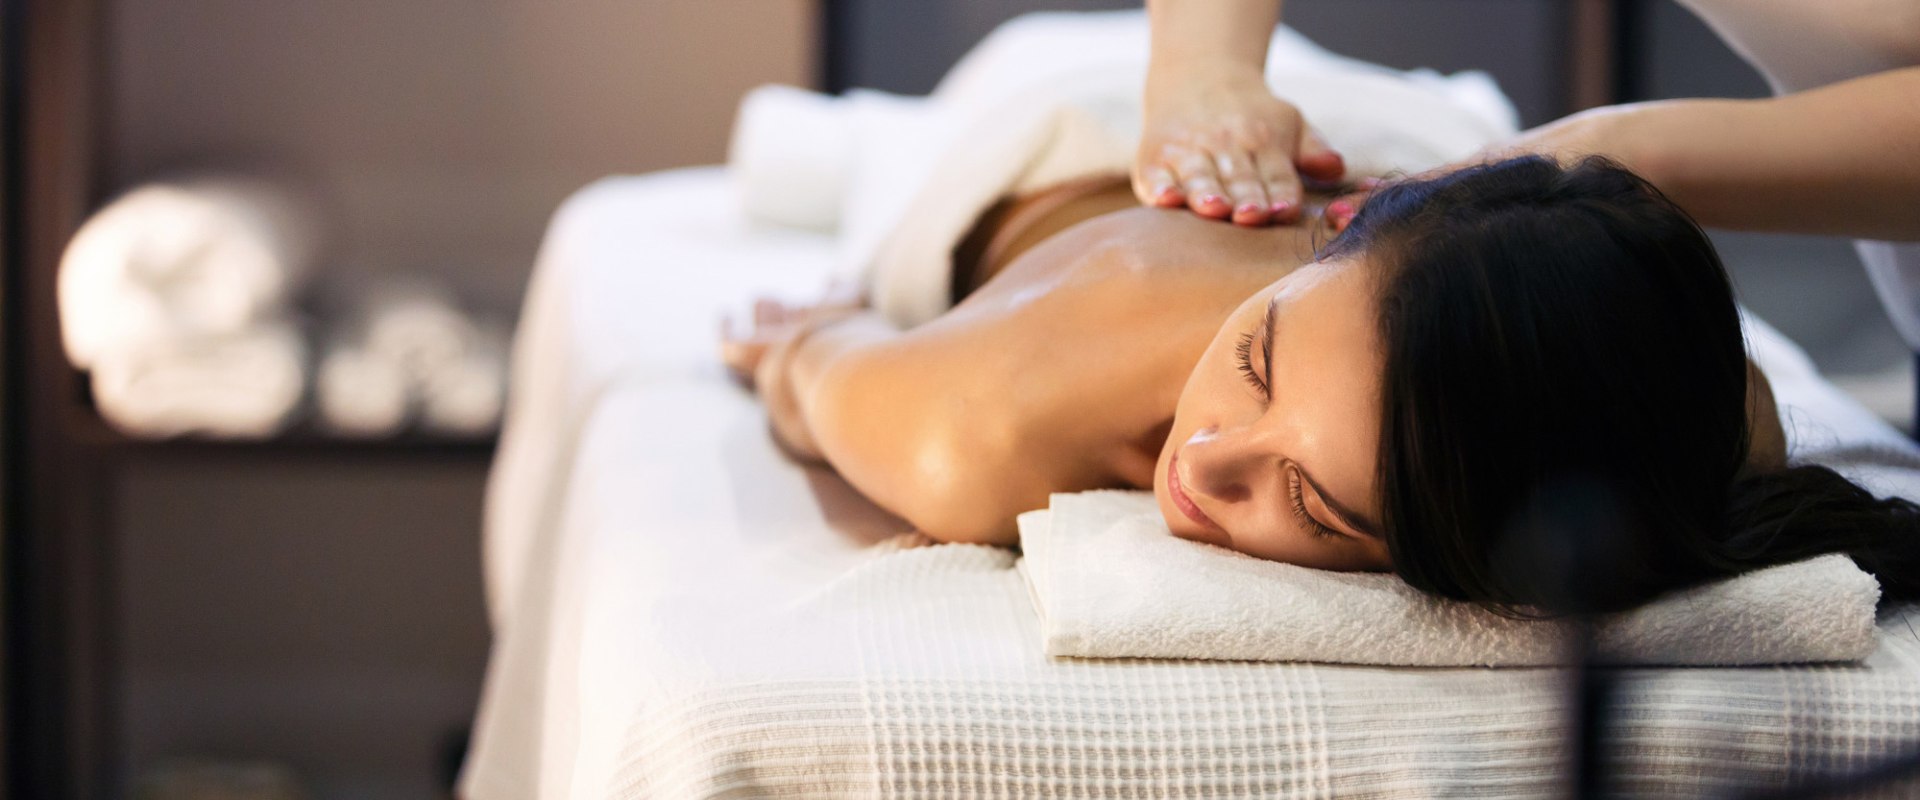 The Benefits of Facial Spa Services for Improved Relaxation and Wellbeing